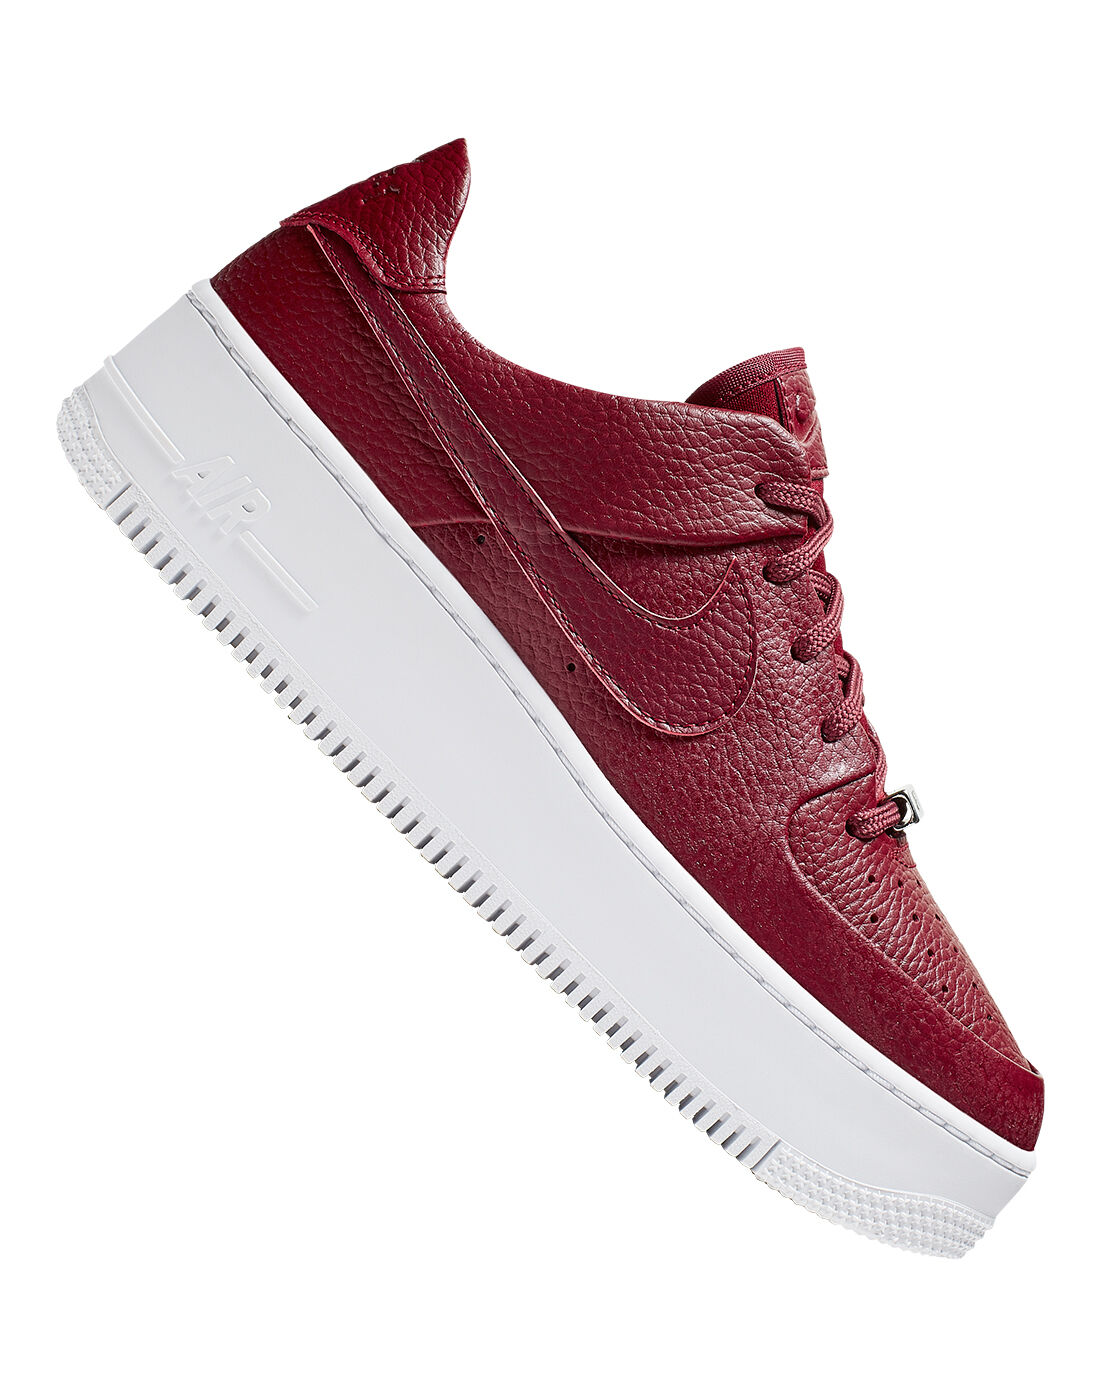 women red air force 1